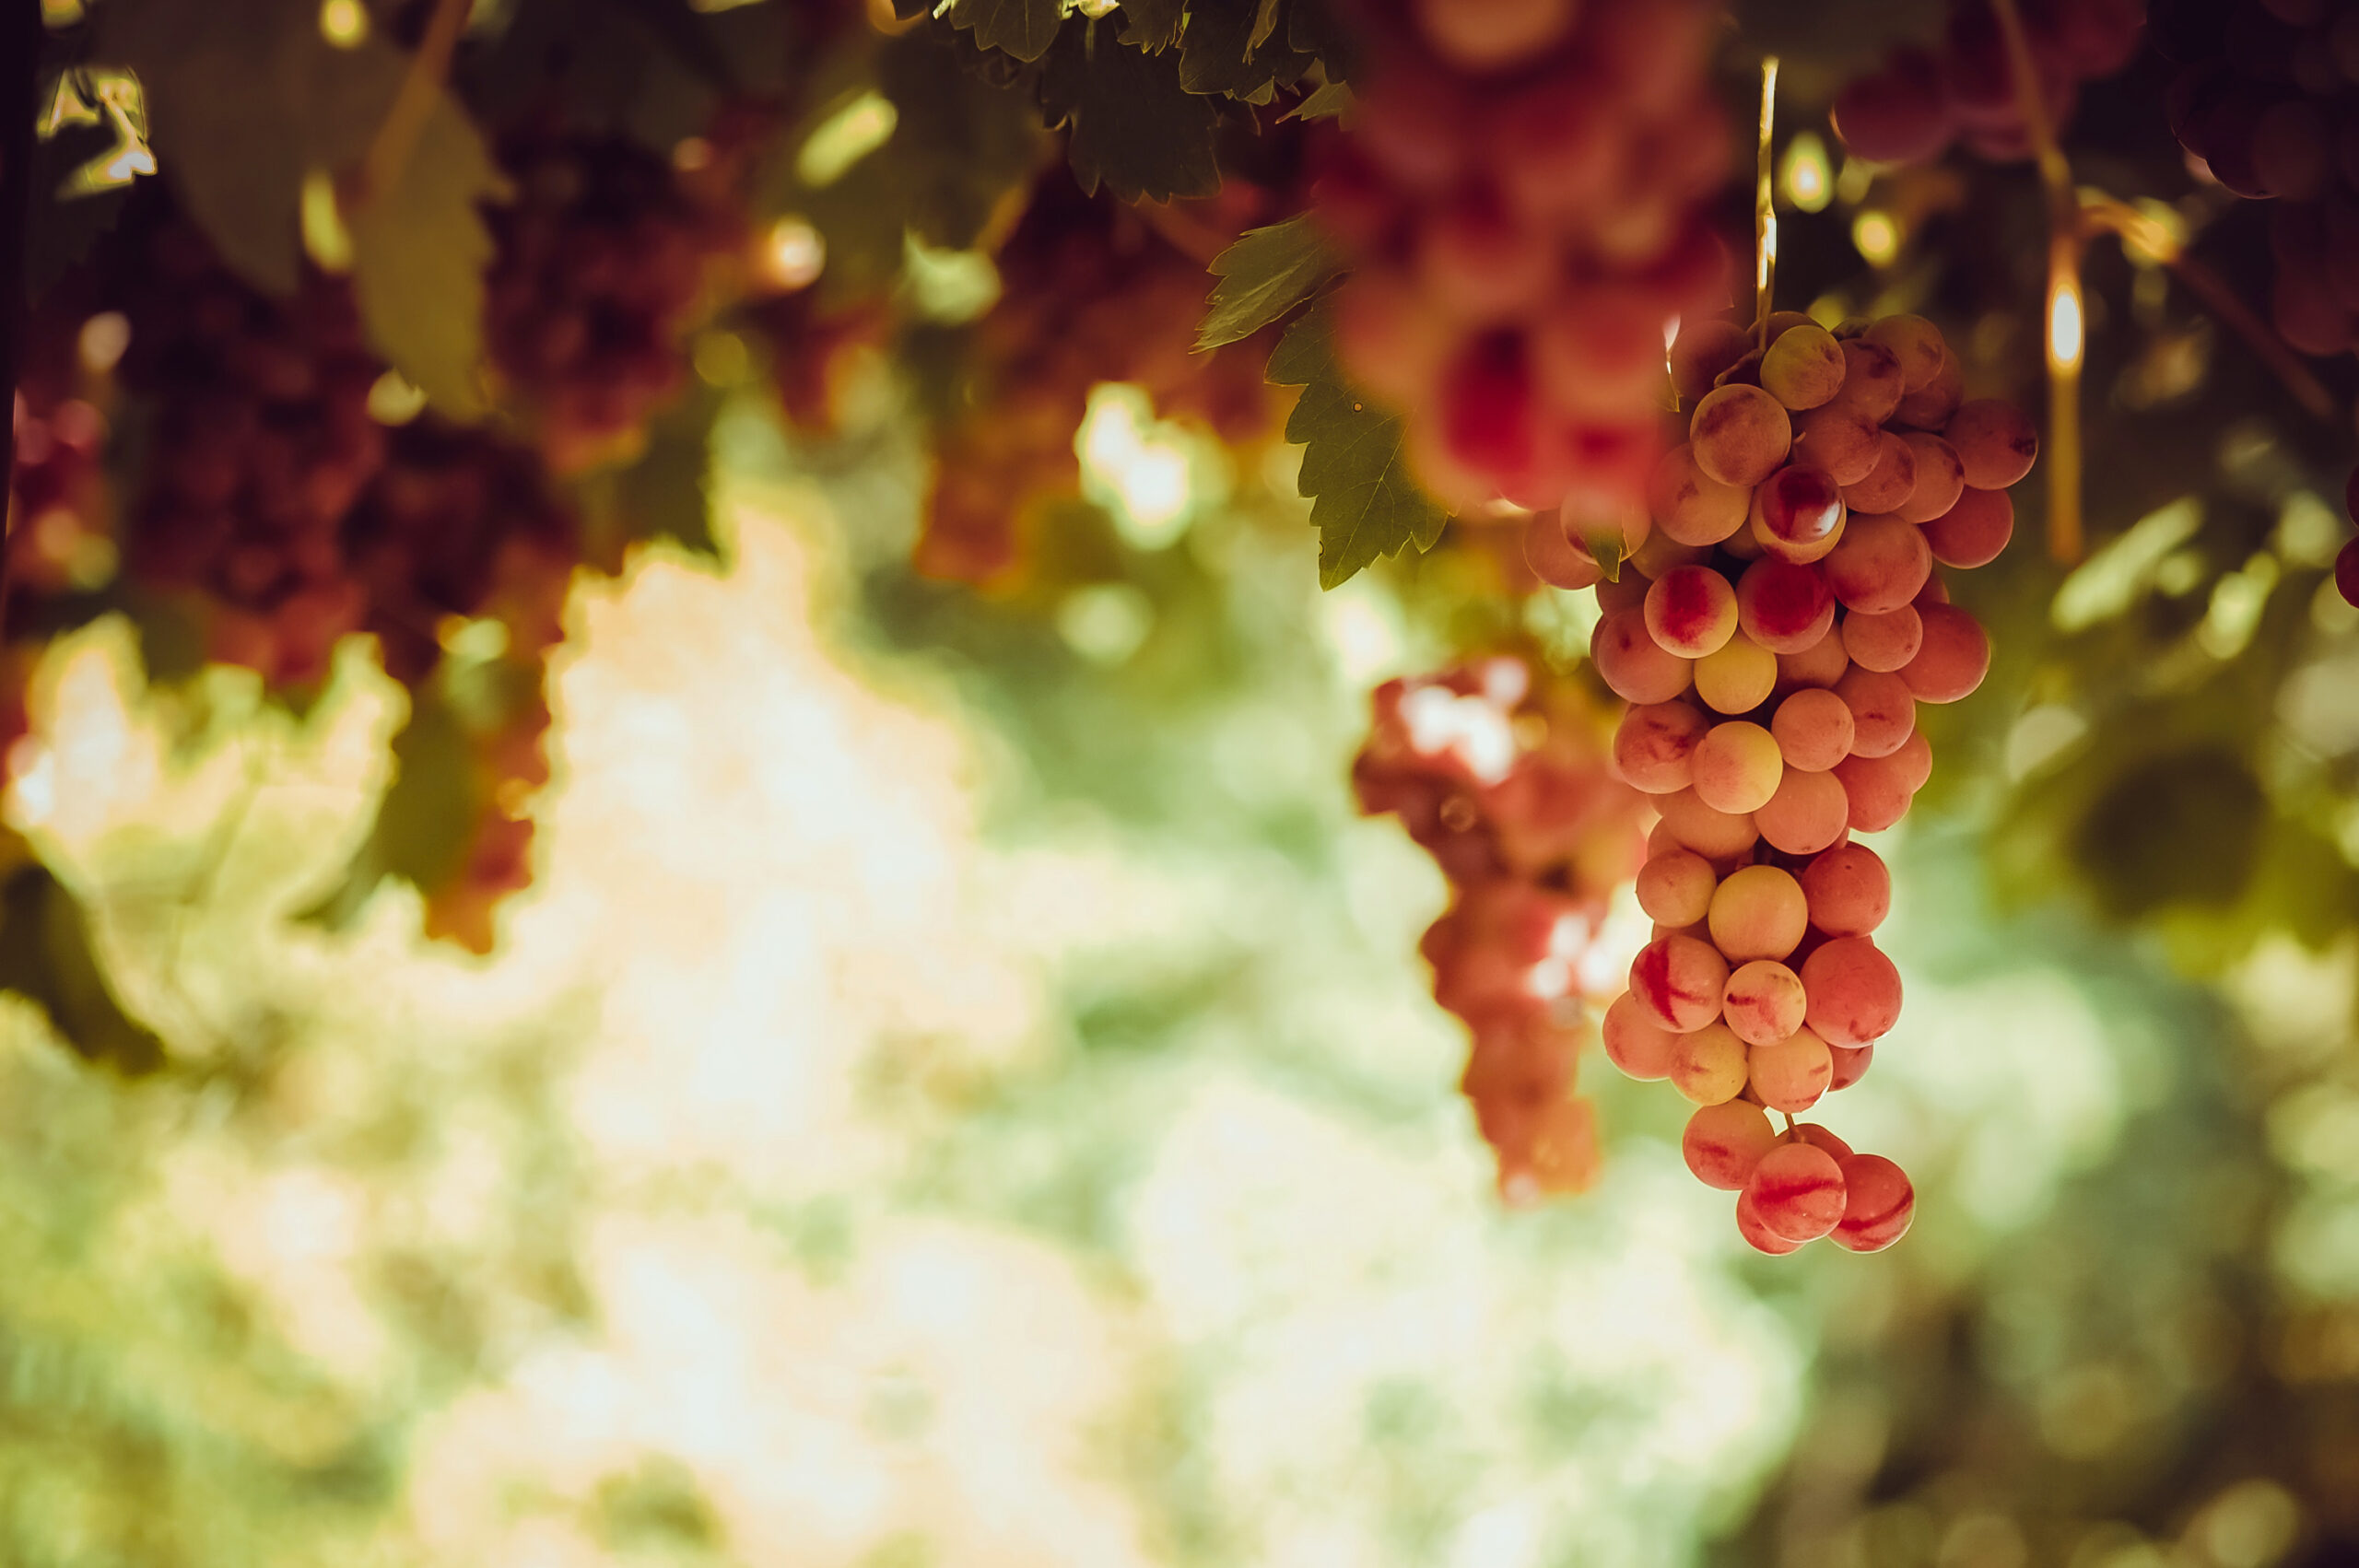 Red grape bunches hanging from vine in sun light